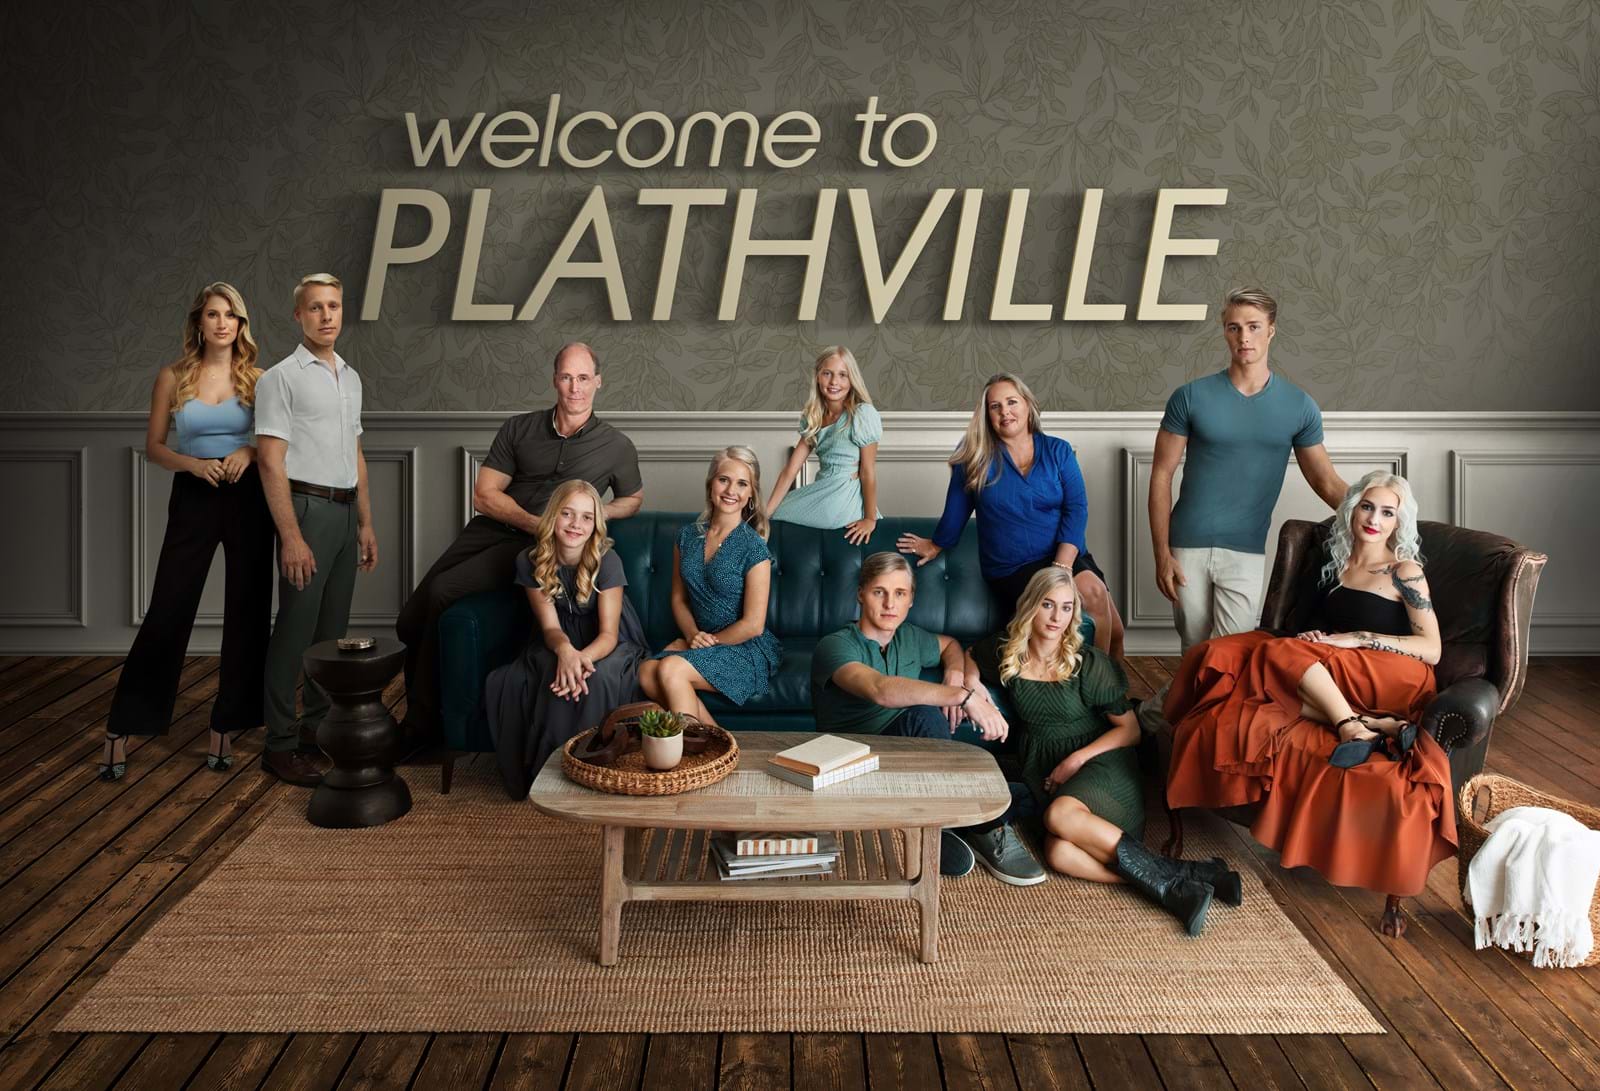 A.Smith & Co's Welcome to Plathville returning for fifth series on TLC!